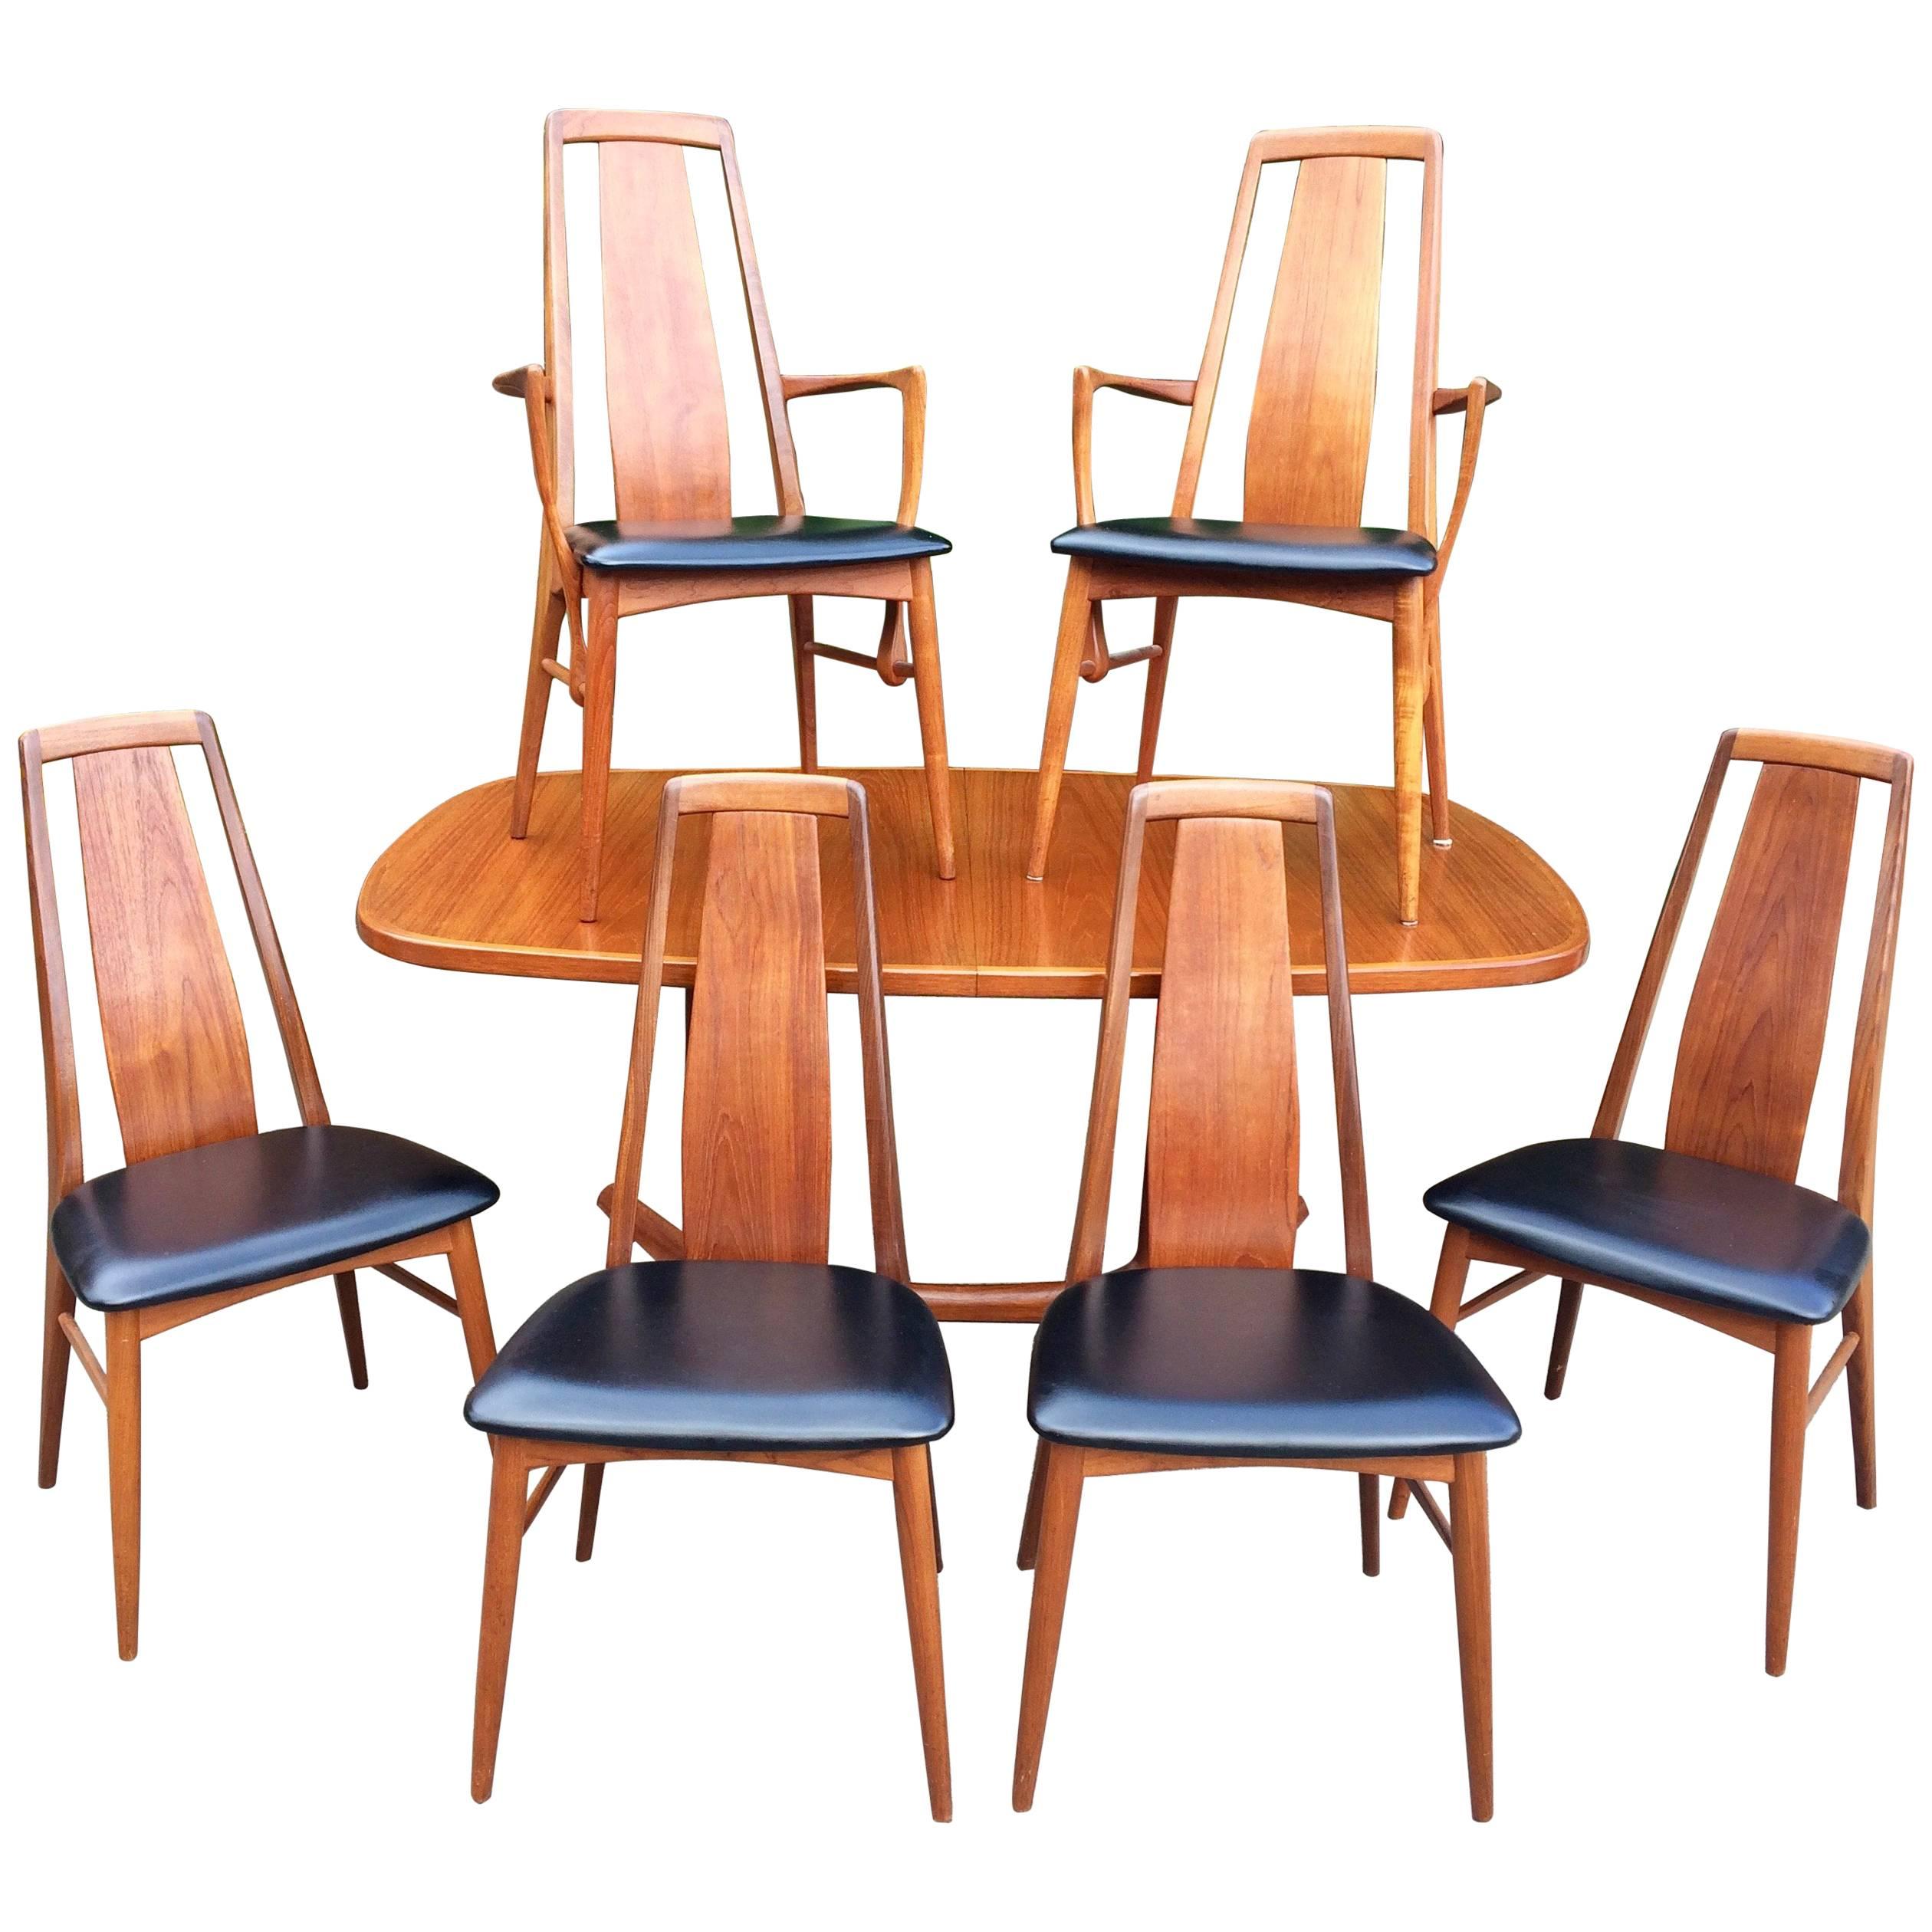 Niels Kofoed for Koefoeds Hornslet Solid Teak Dining Table and Six Chairs Danish